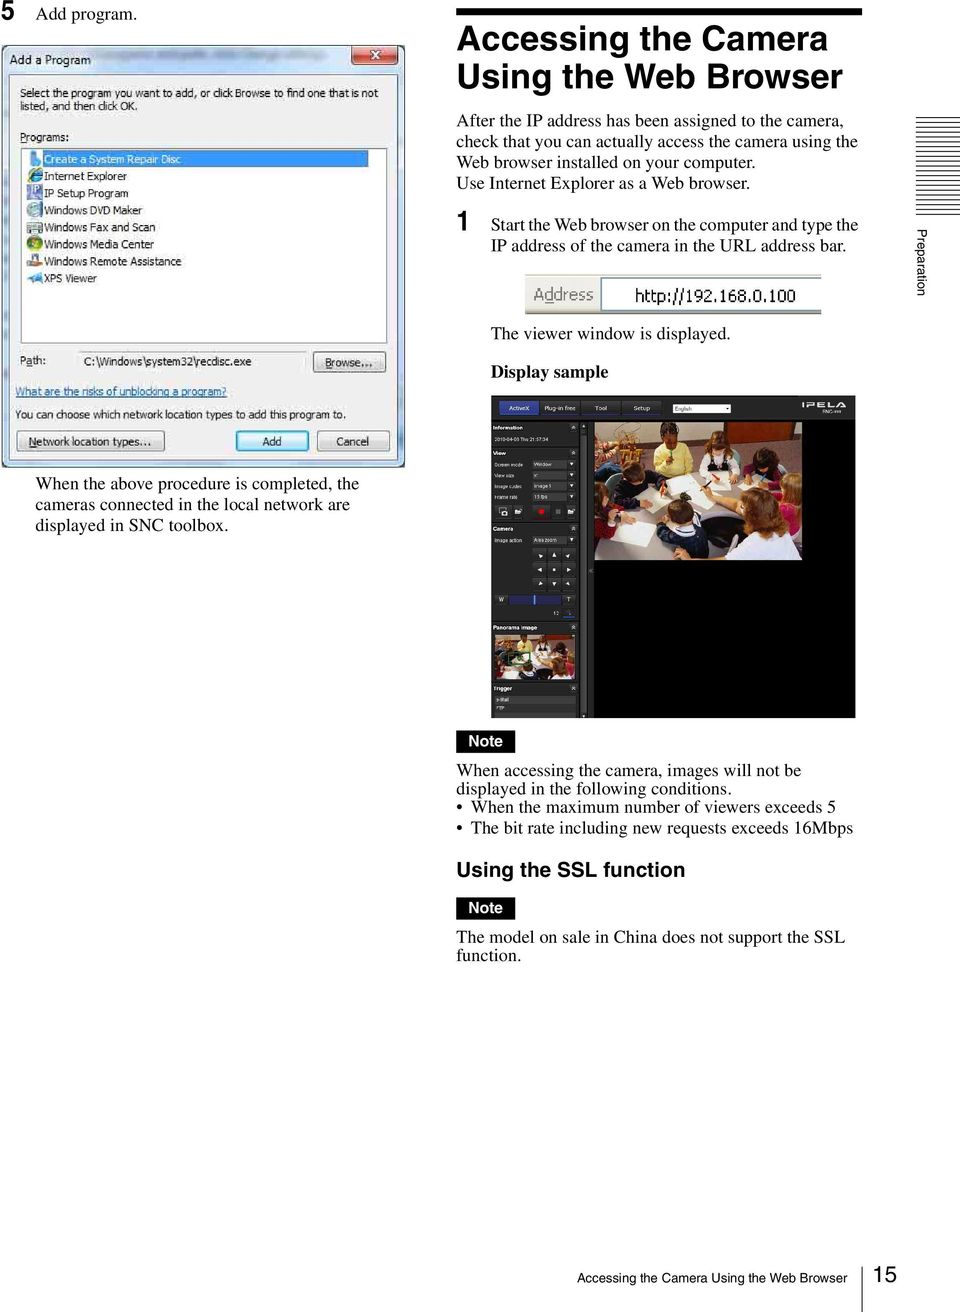 Use Internet Explorer as a Web browser. 1 Start the Web browser on the computer and type the IP address of the camera in the URL address bar. Preparation The viewer window is displayed.